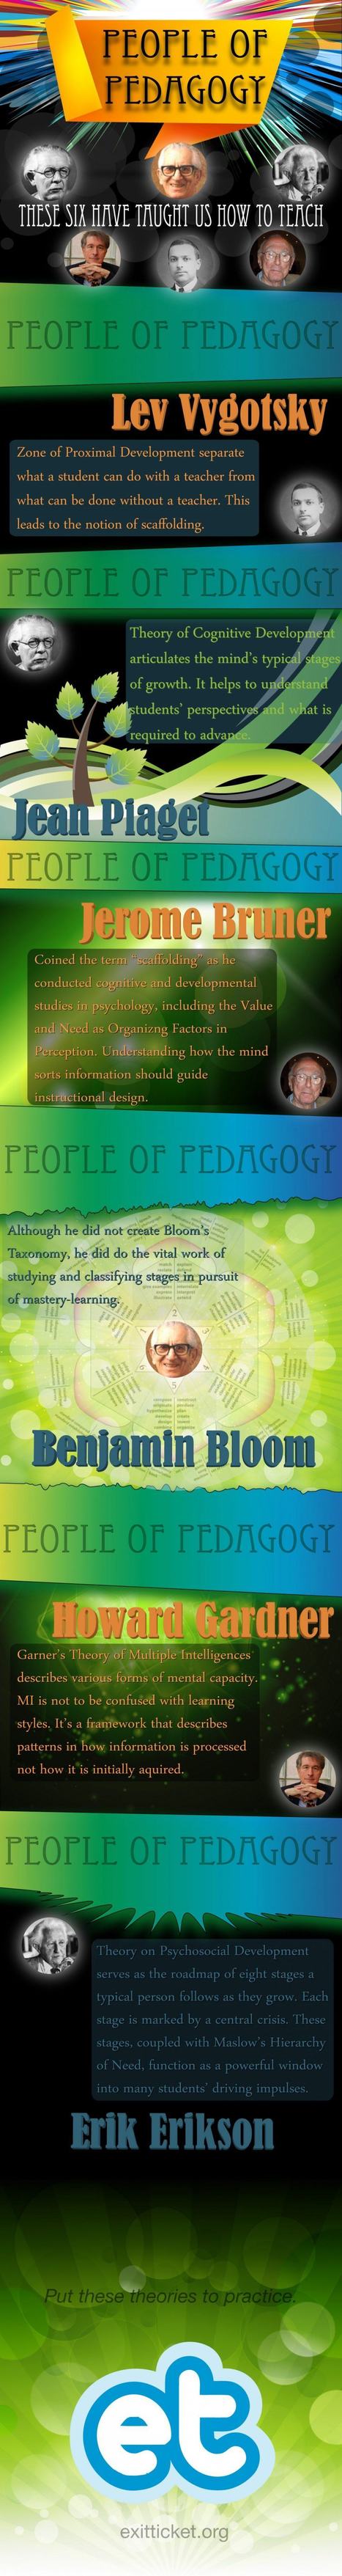 The People of Pedagogy Infographic | E-Learning-Inclusivo (Mashup) | Scoop.it